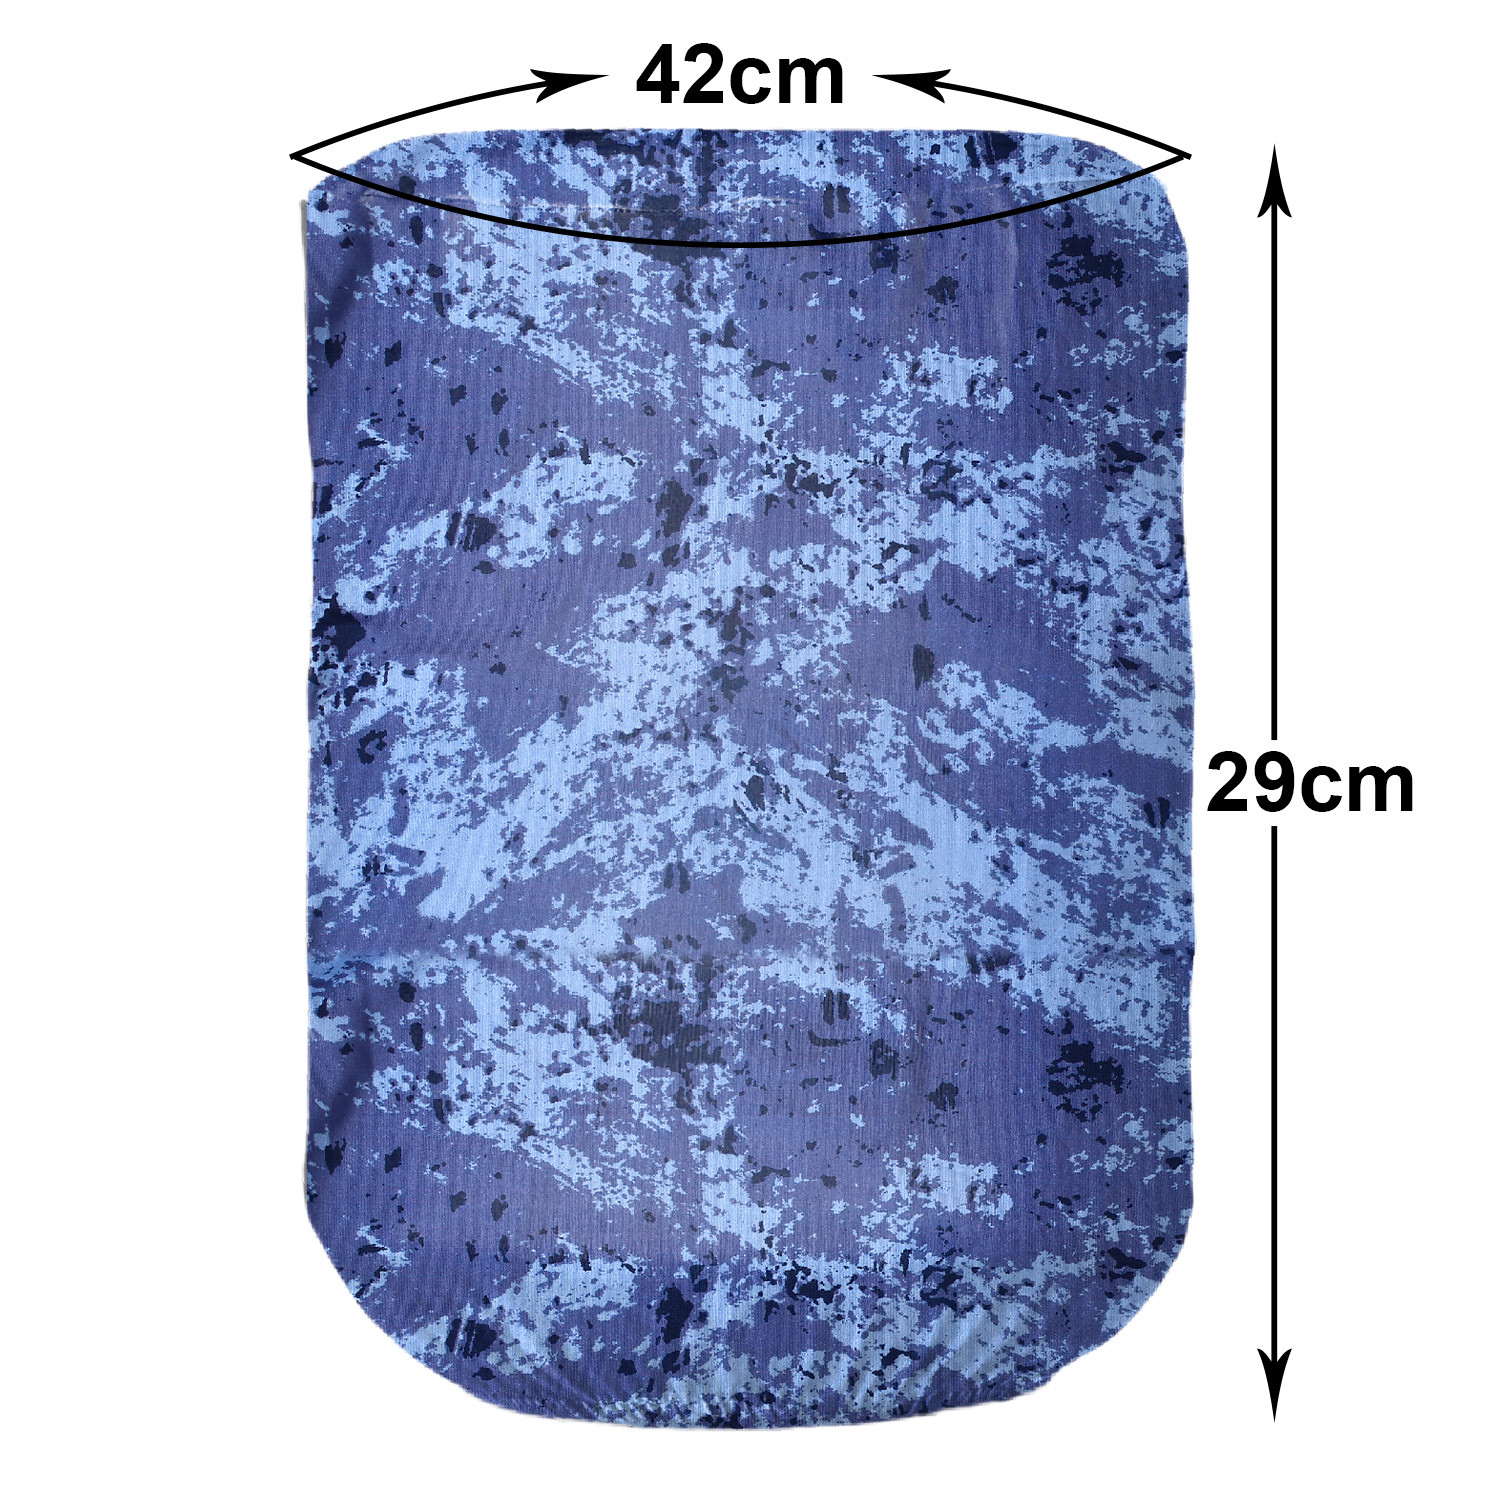 Kuber Industries Water Dispenser Bottle Cover|Camo Print & Stretchy Polyester Fabric|Bottle Protector with Elastic Closure,20Ltr, (Navy Blue)